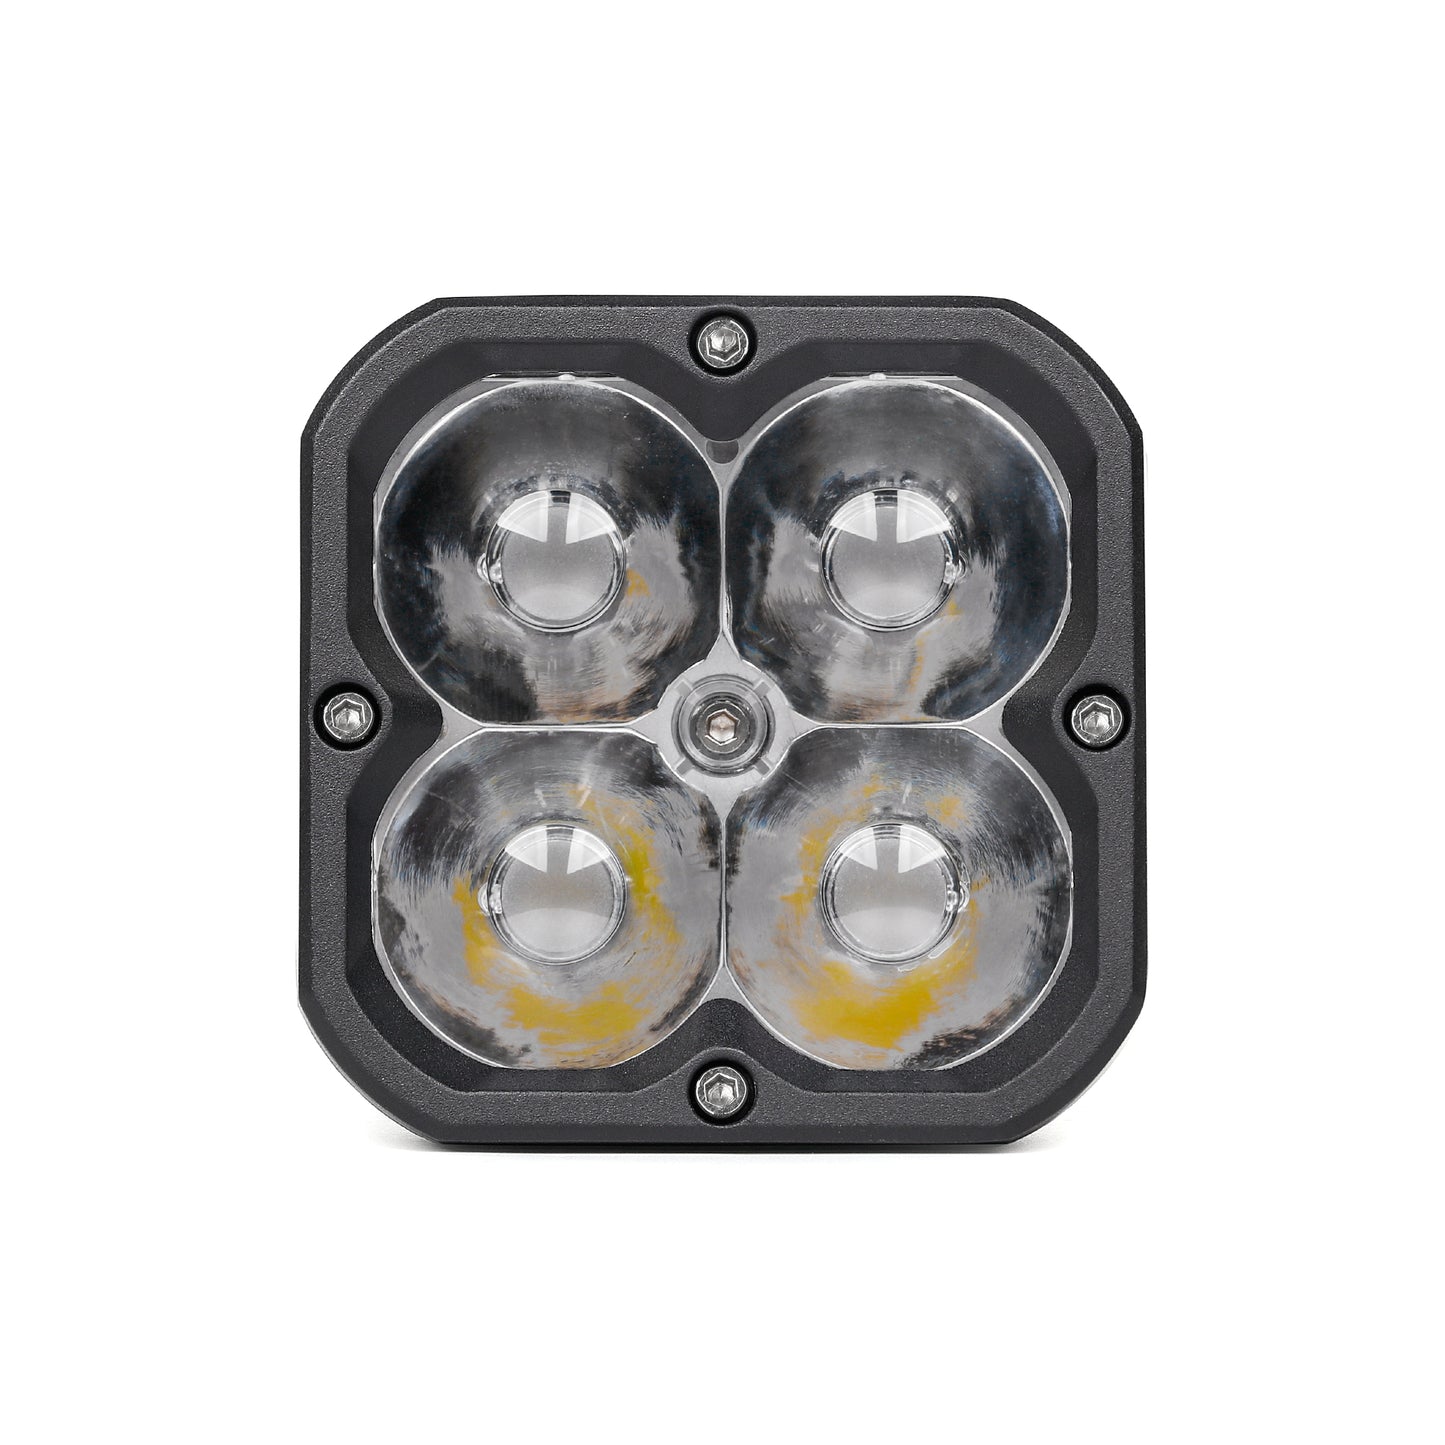 Orion 3" Square White Spot Light Pair with Amber Backlight